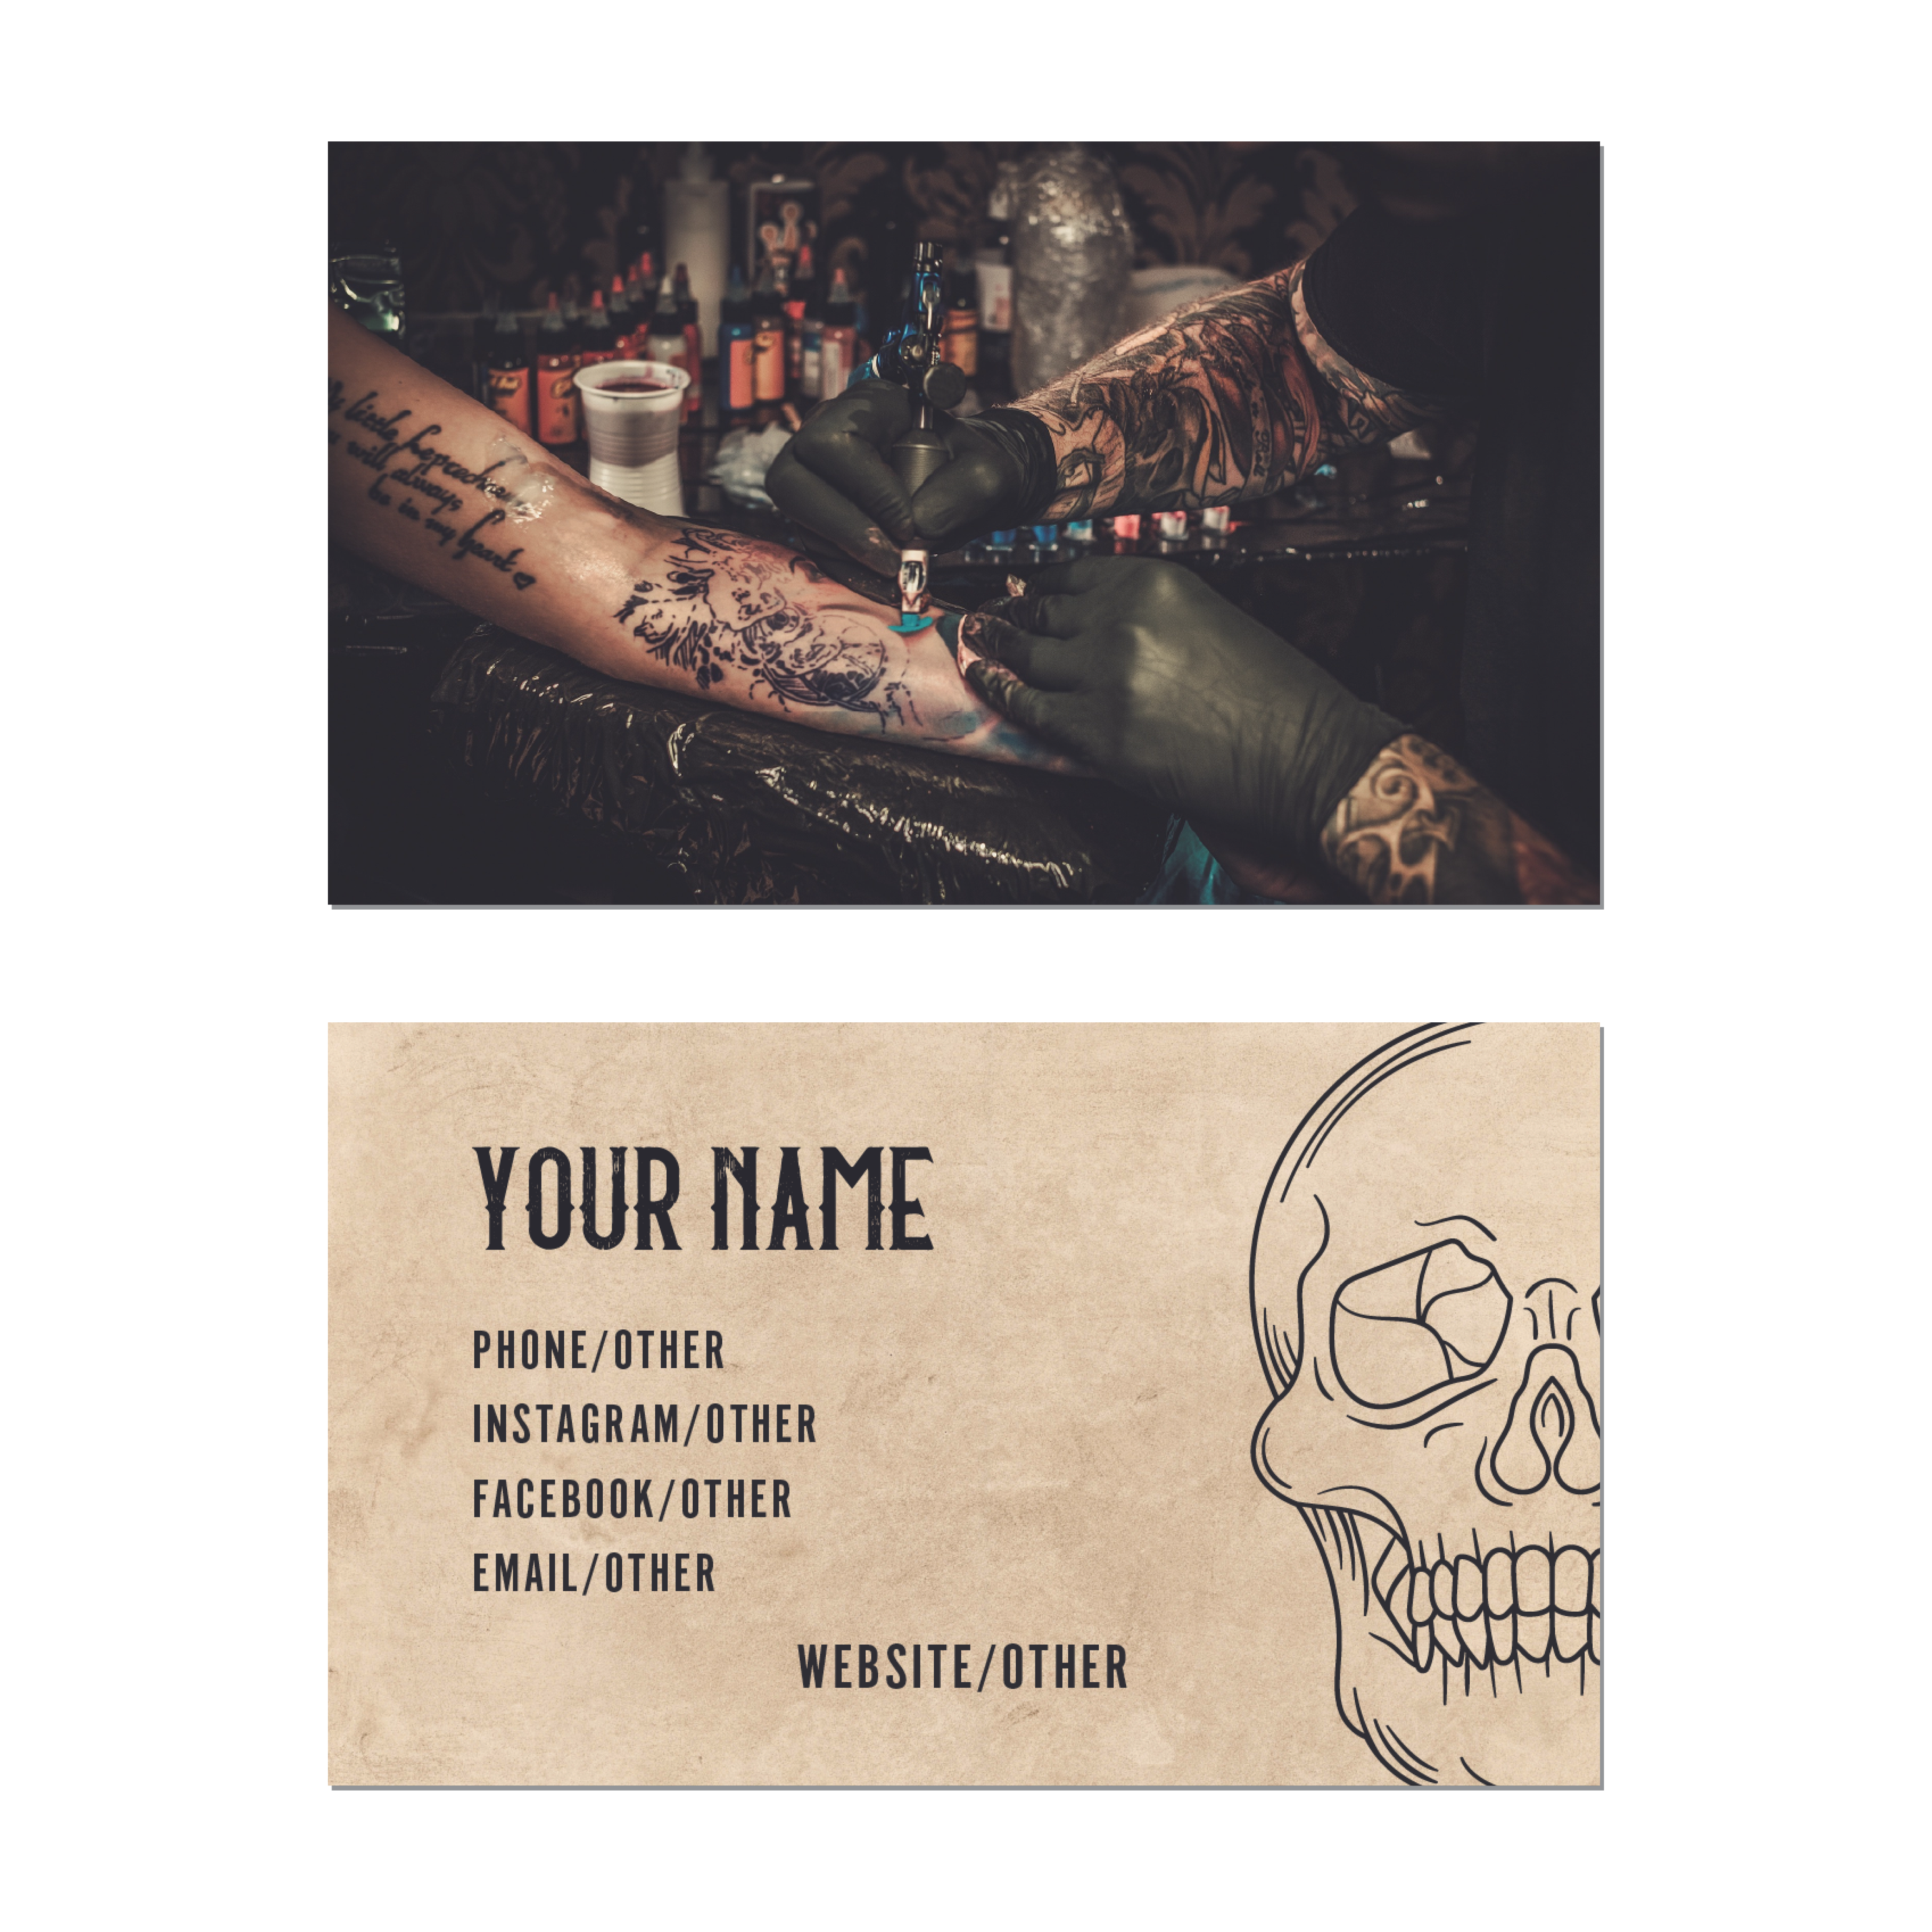 Tattoo Business cards Template | PosterMyWall